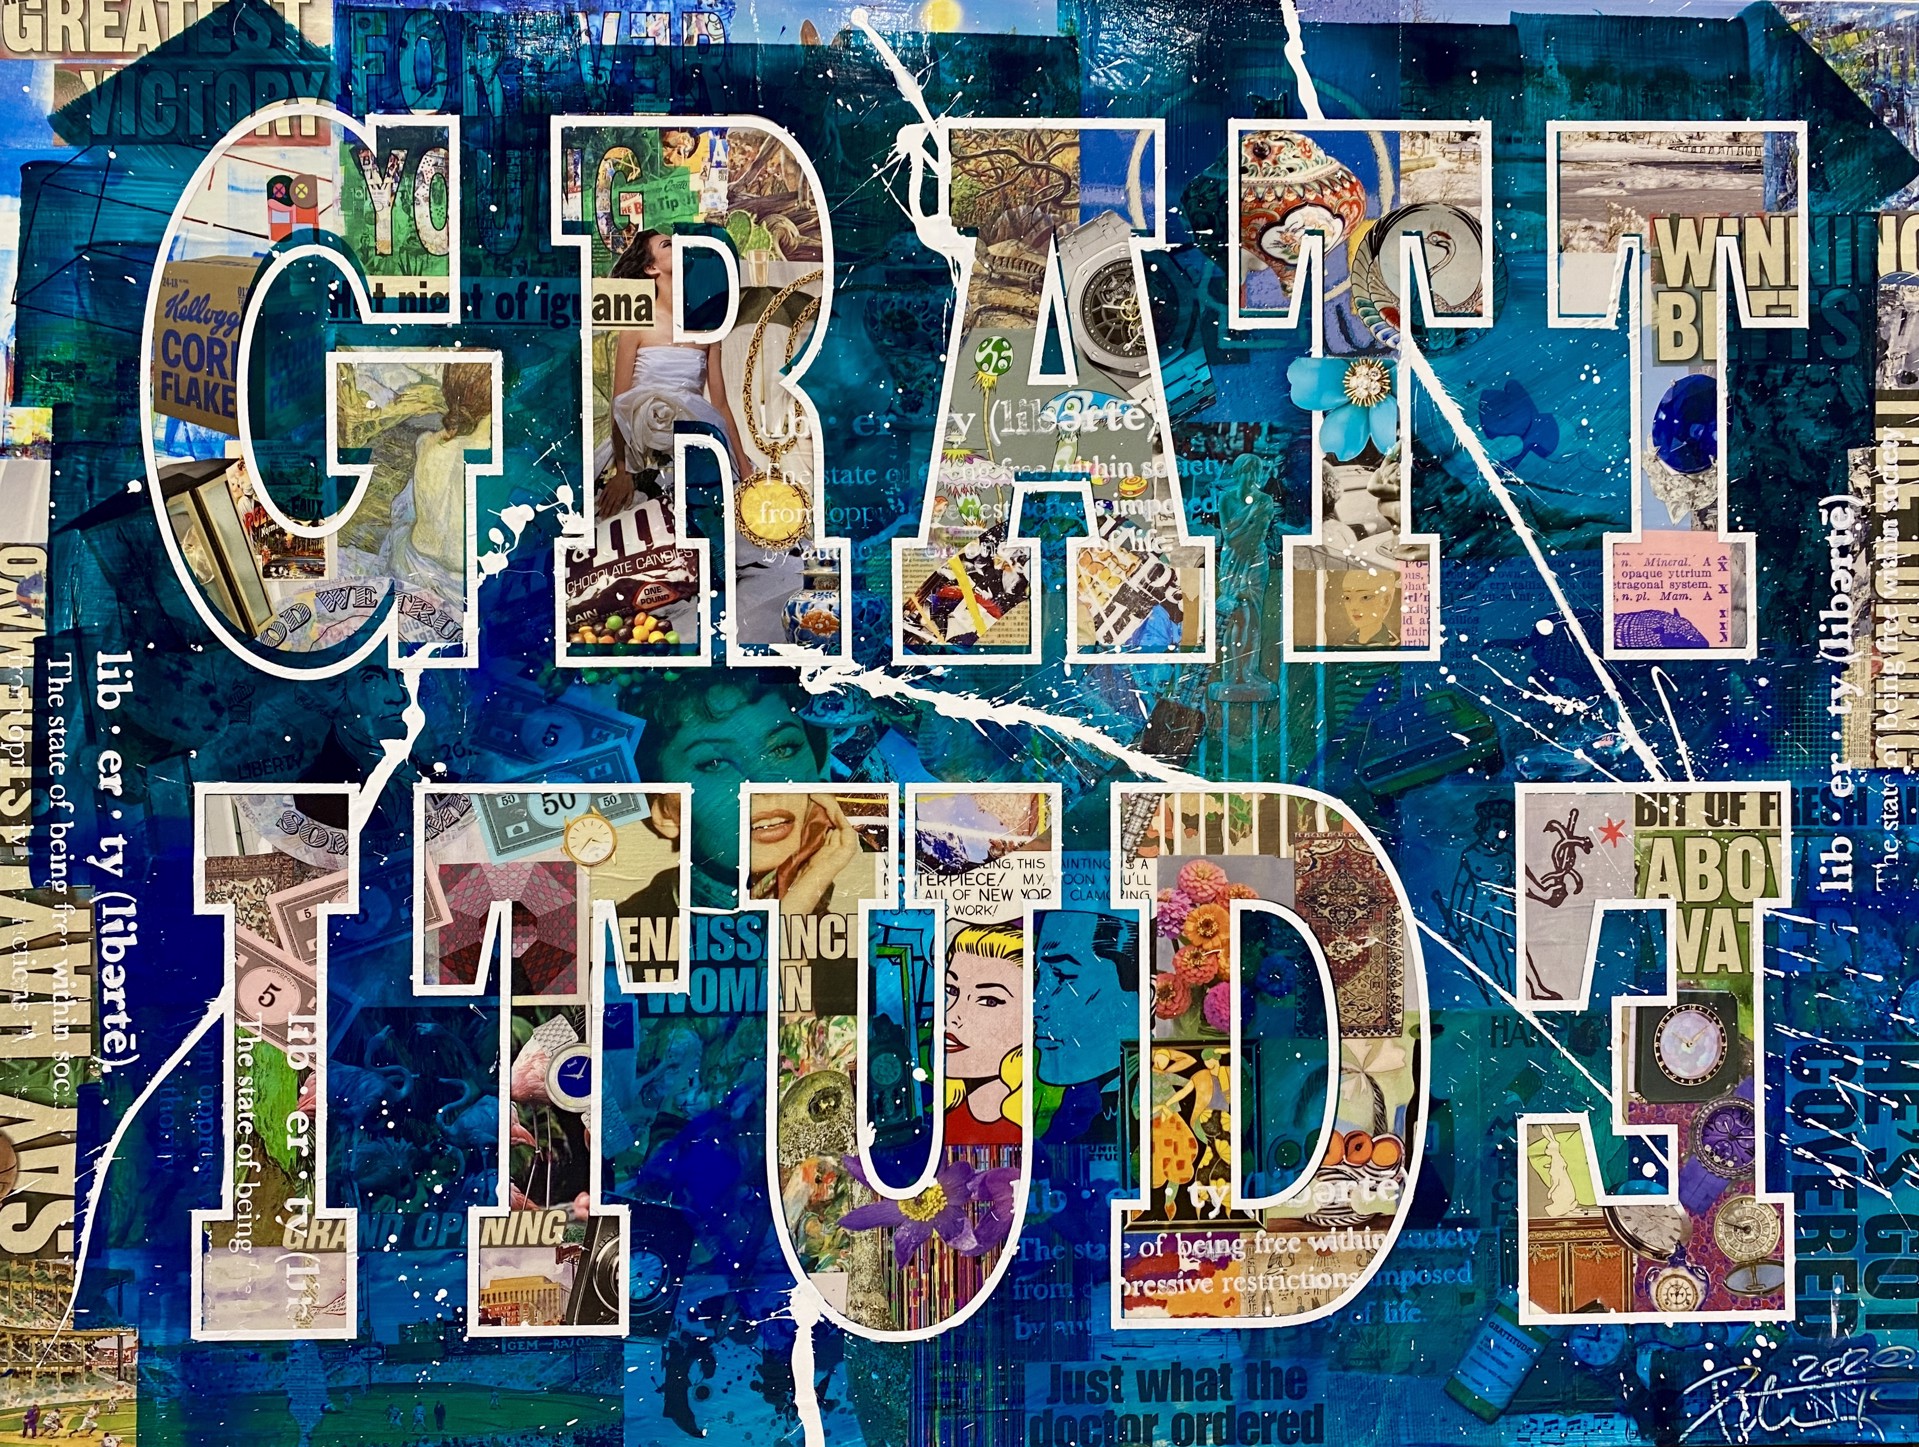 Grattitude by Peter Tunney